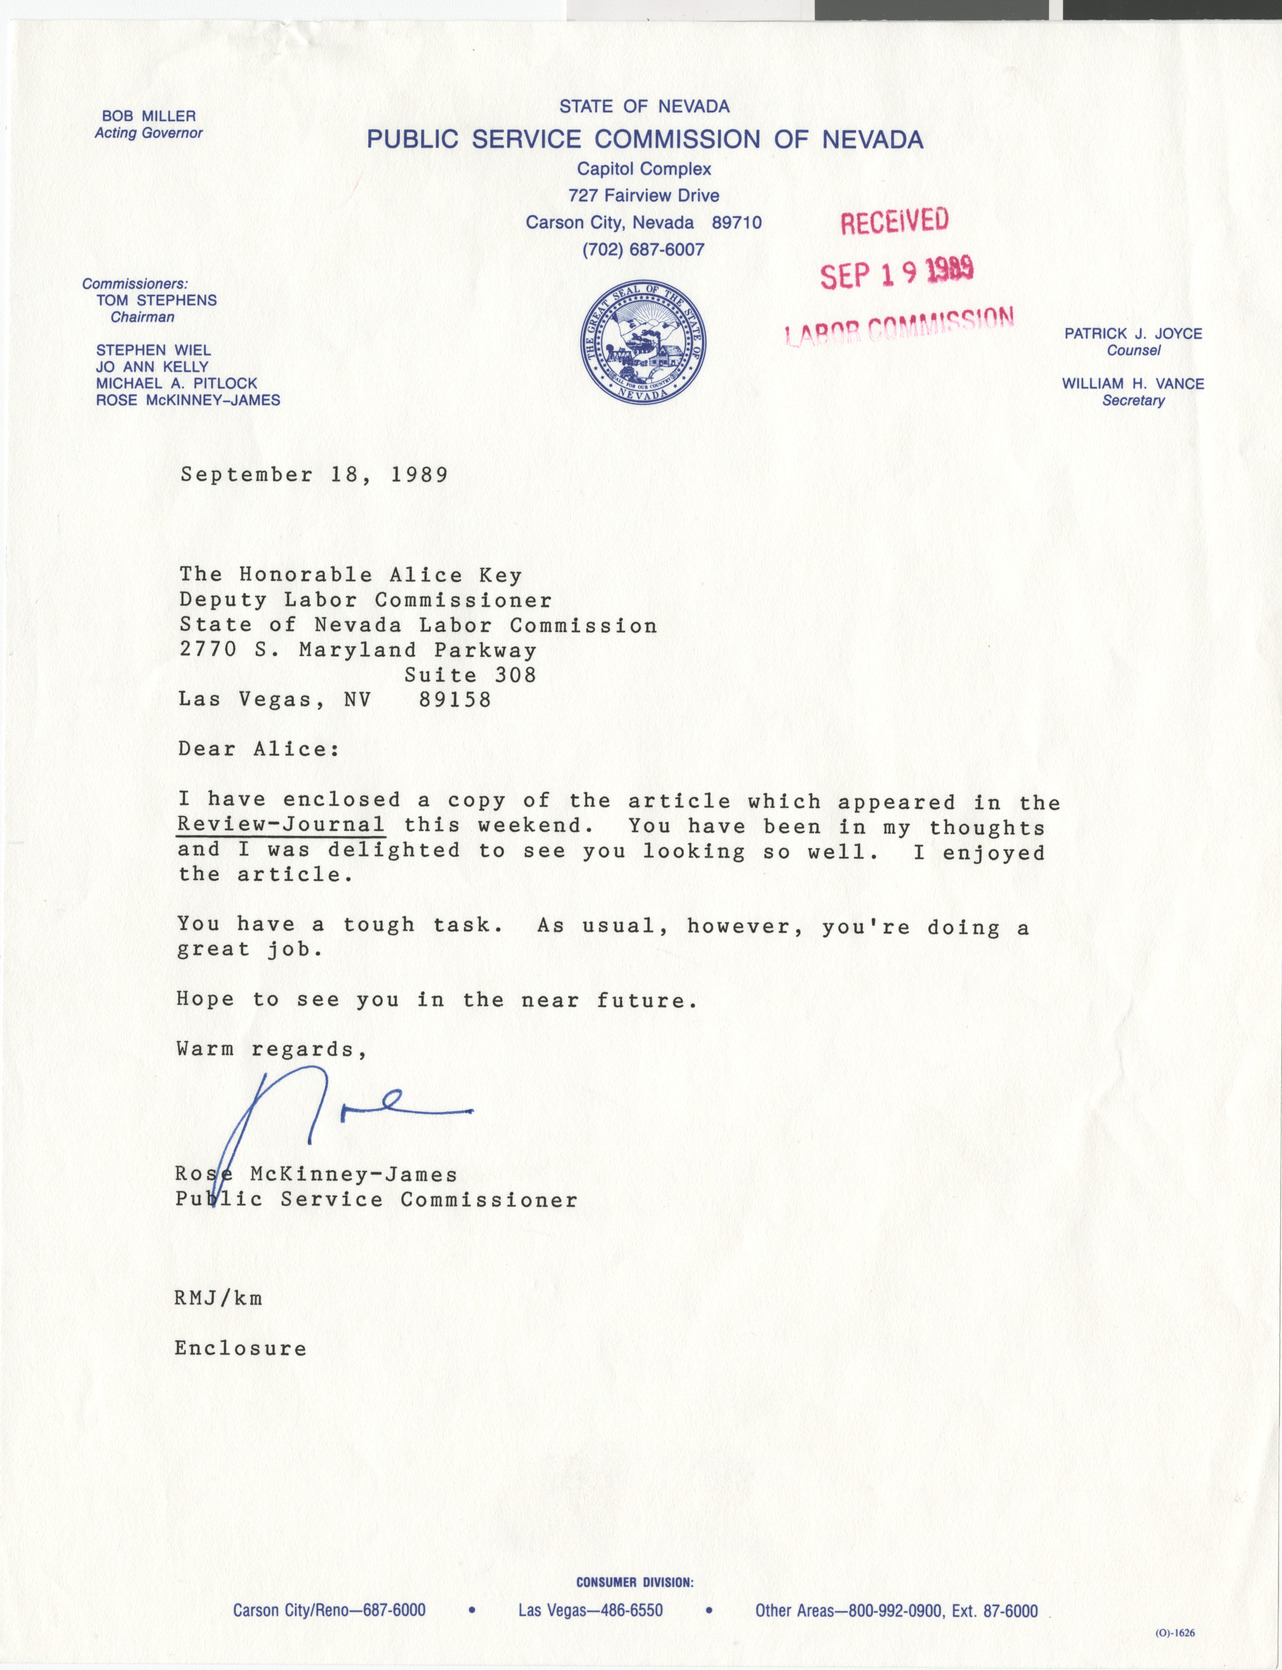 Letter from Rose McKinney-James, Public Service Commissioner, to Alice Key, 1989